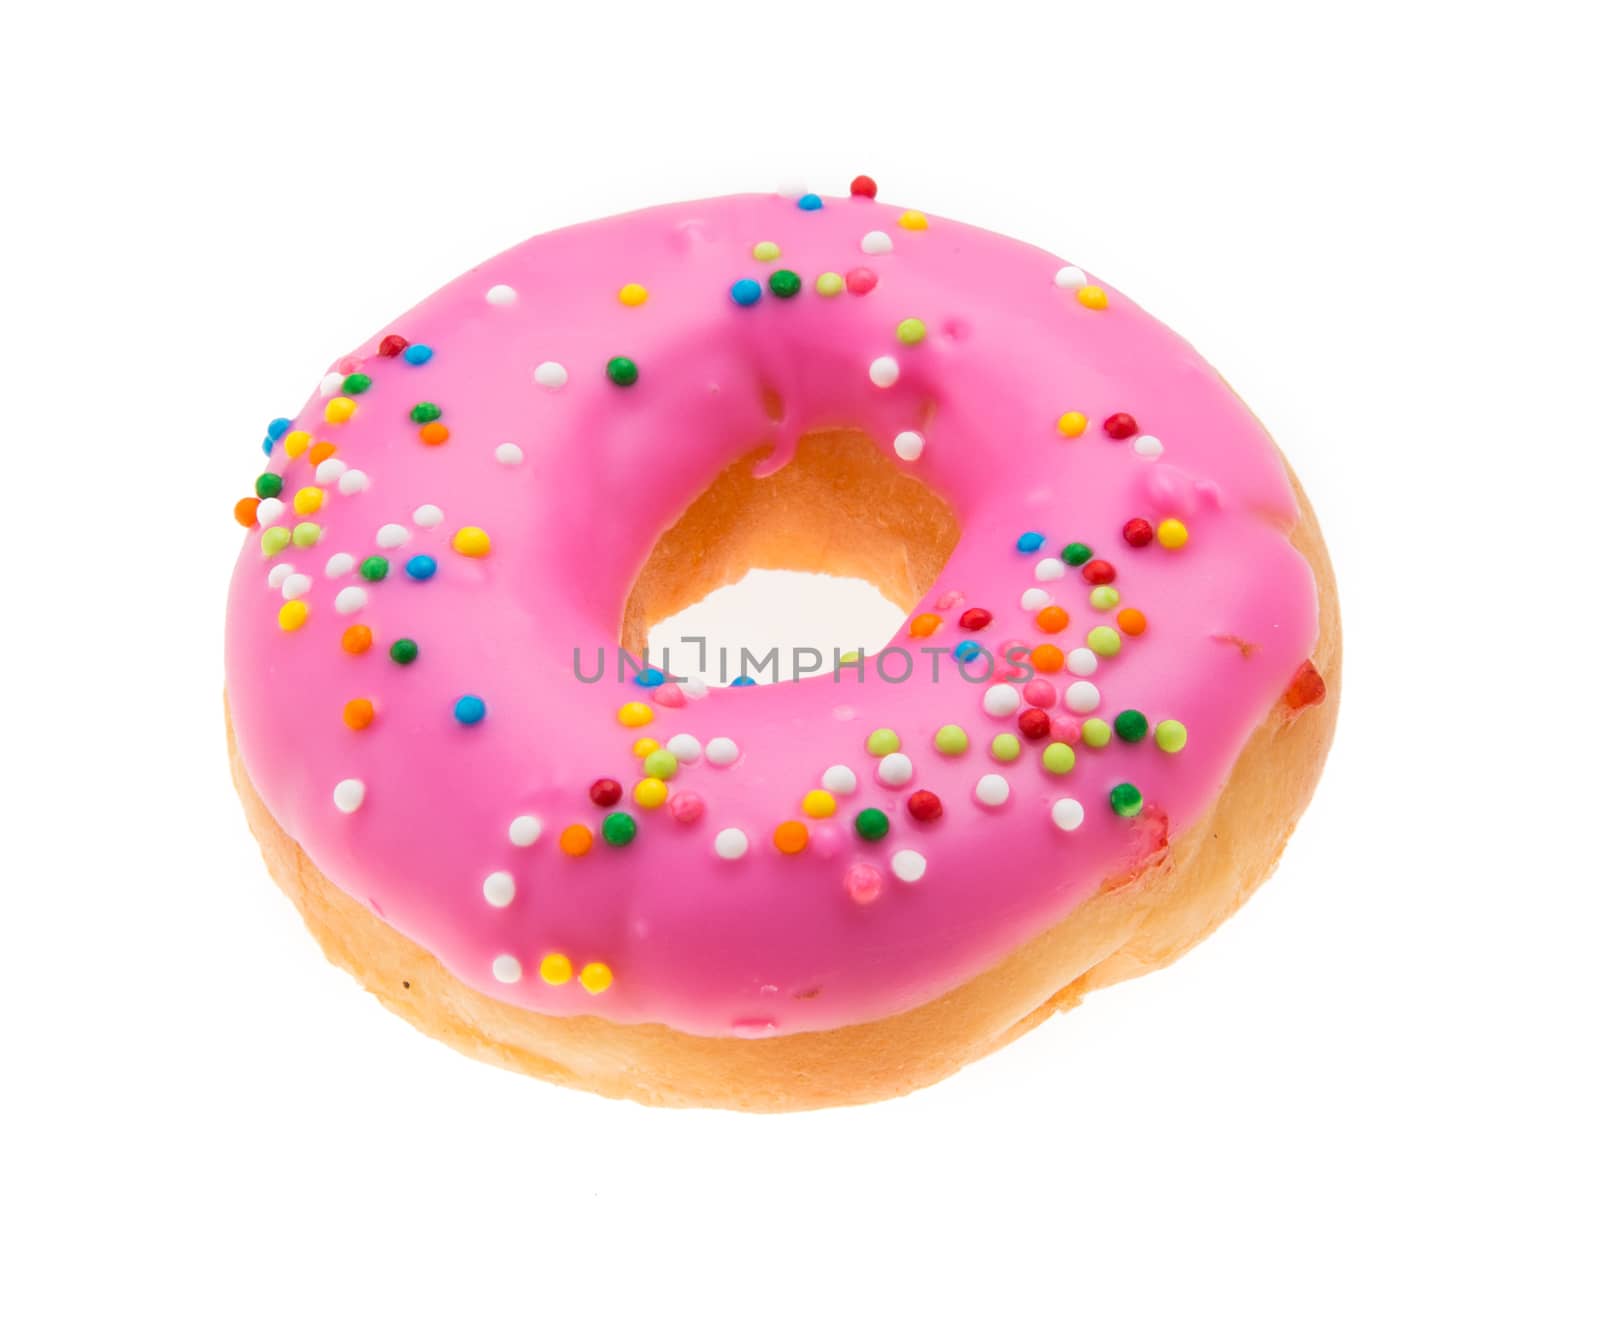 Doughnuts isolated on white background